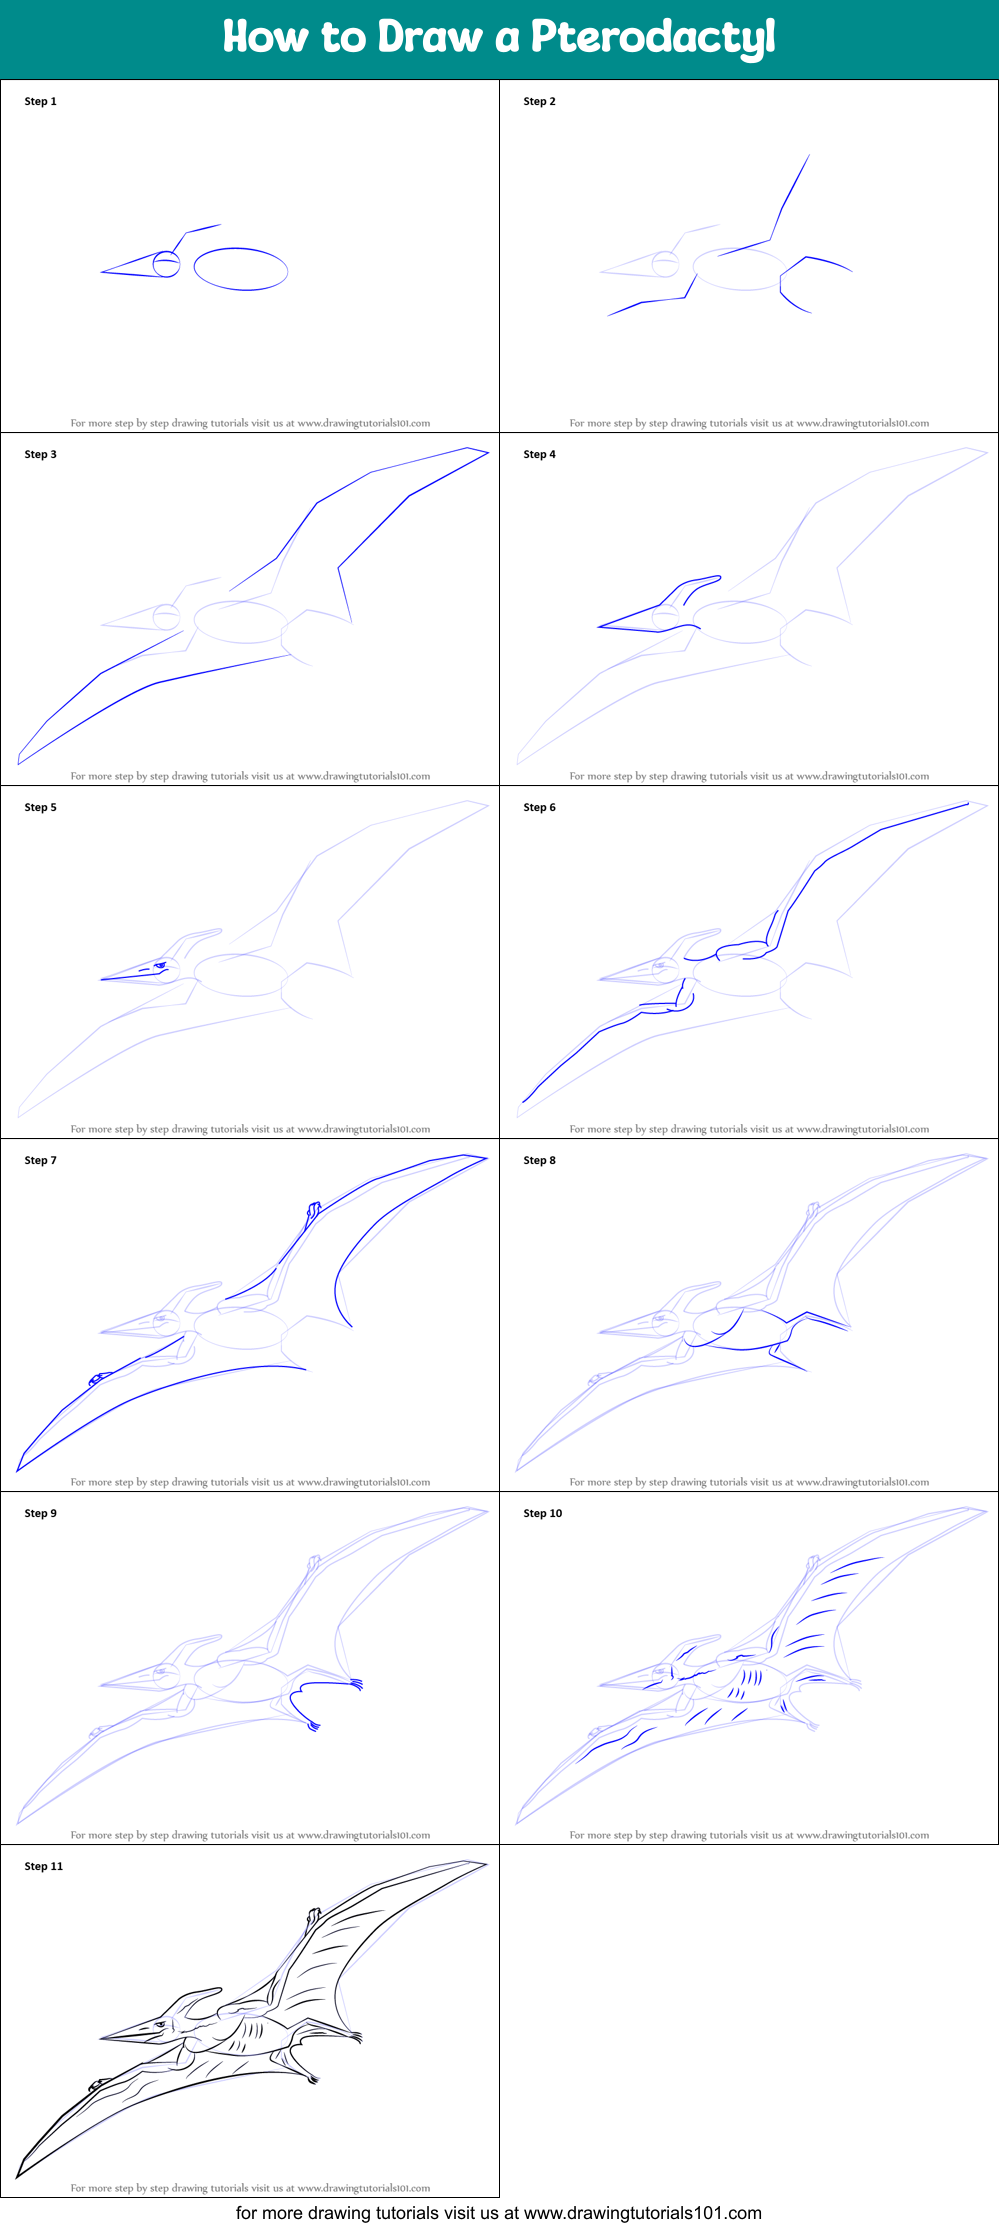 How to Draw a Pterodactyl printable step by step drawing sheet